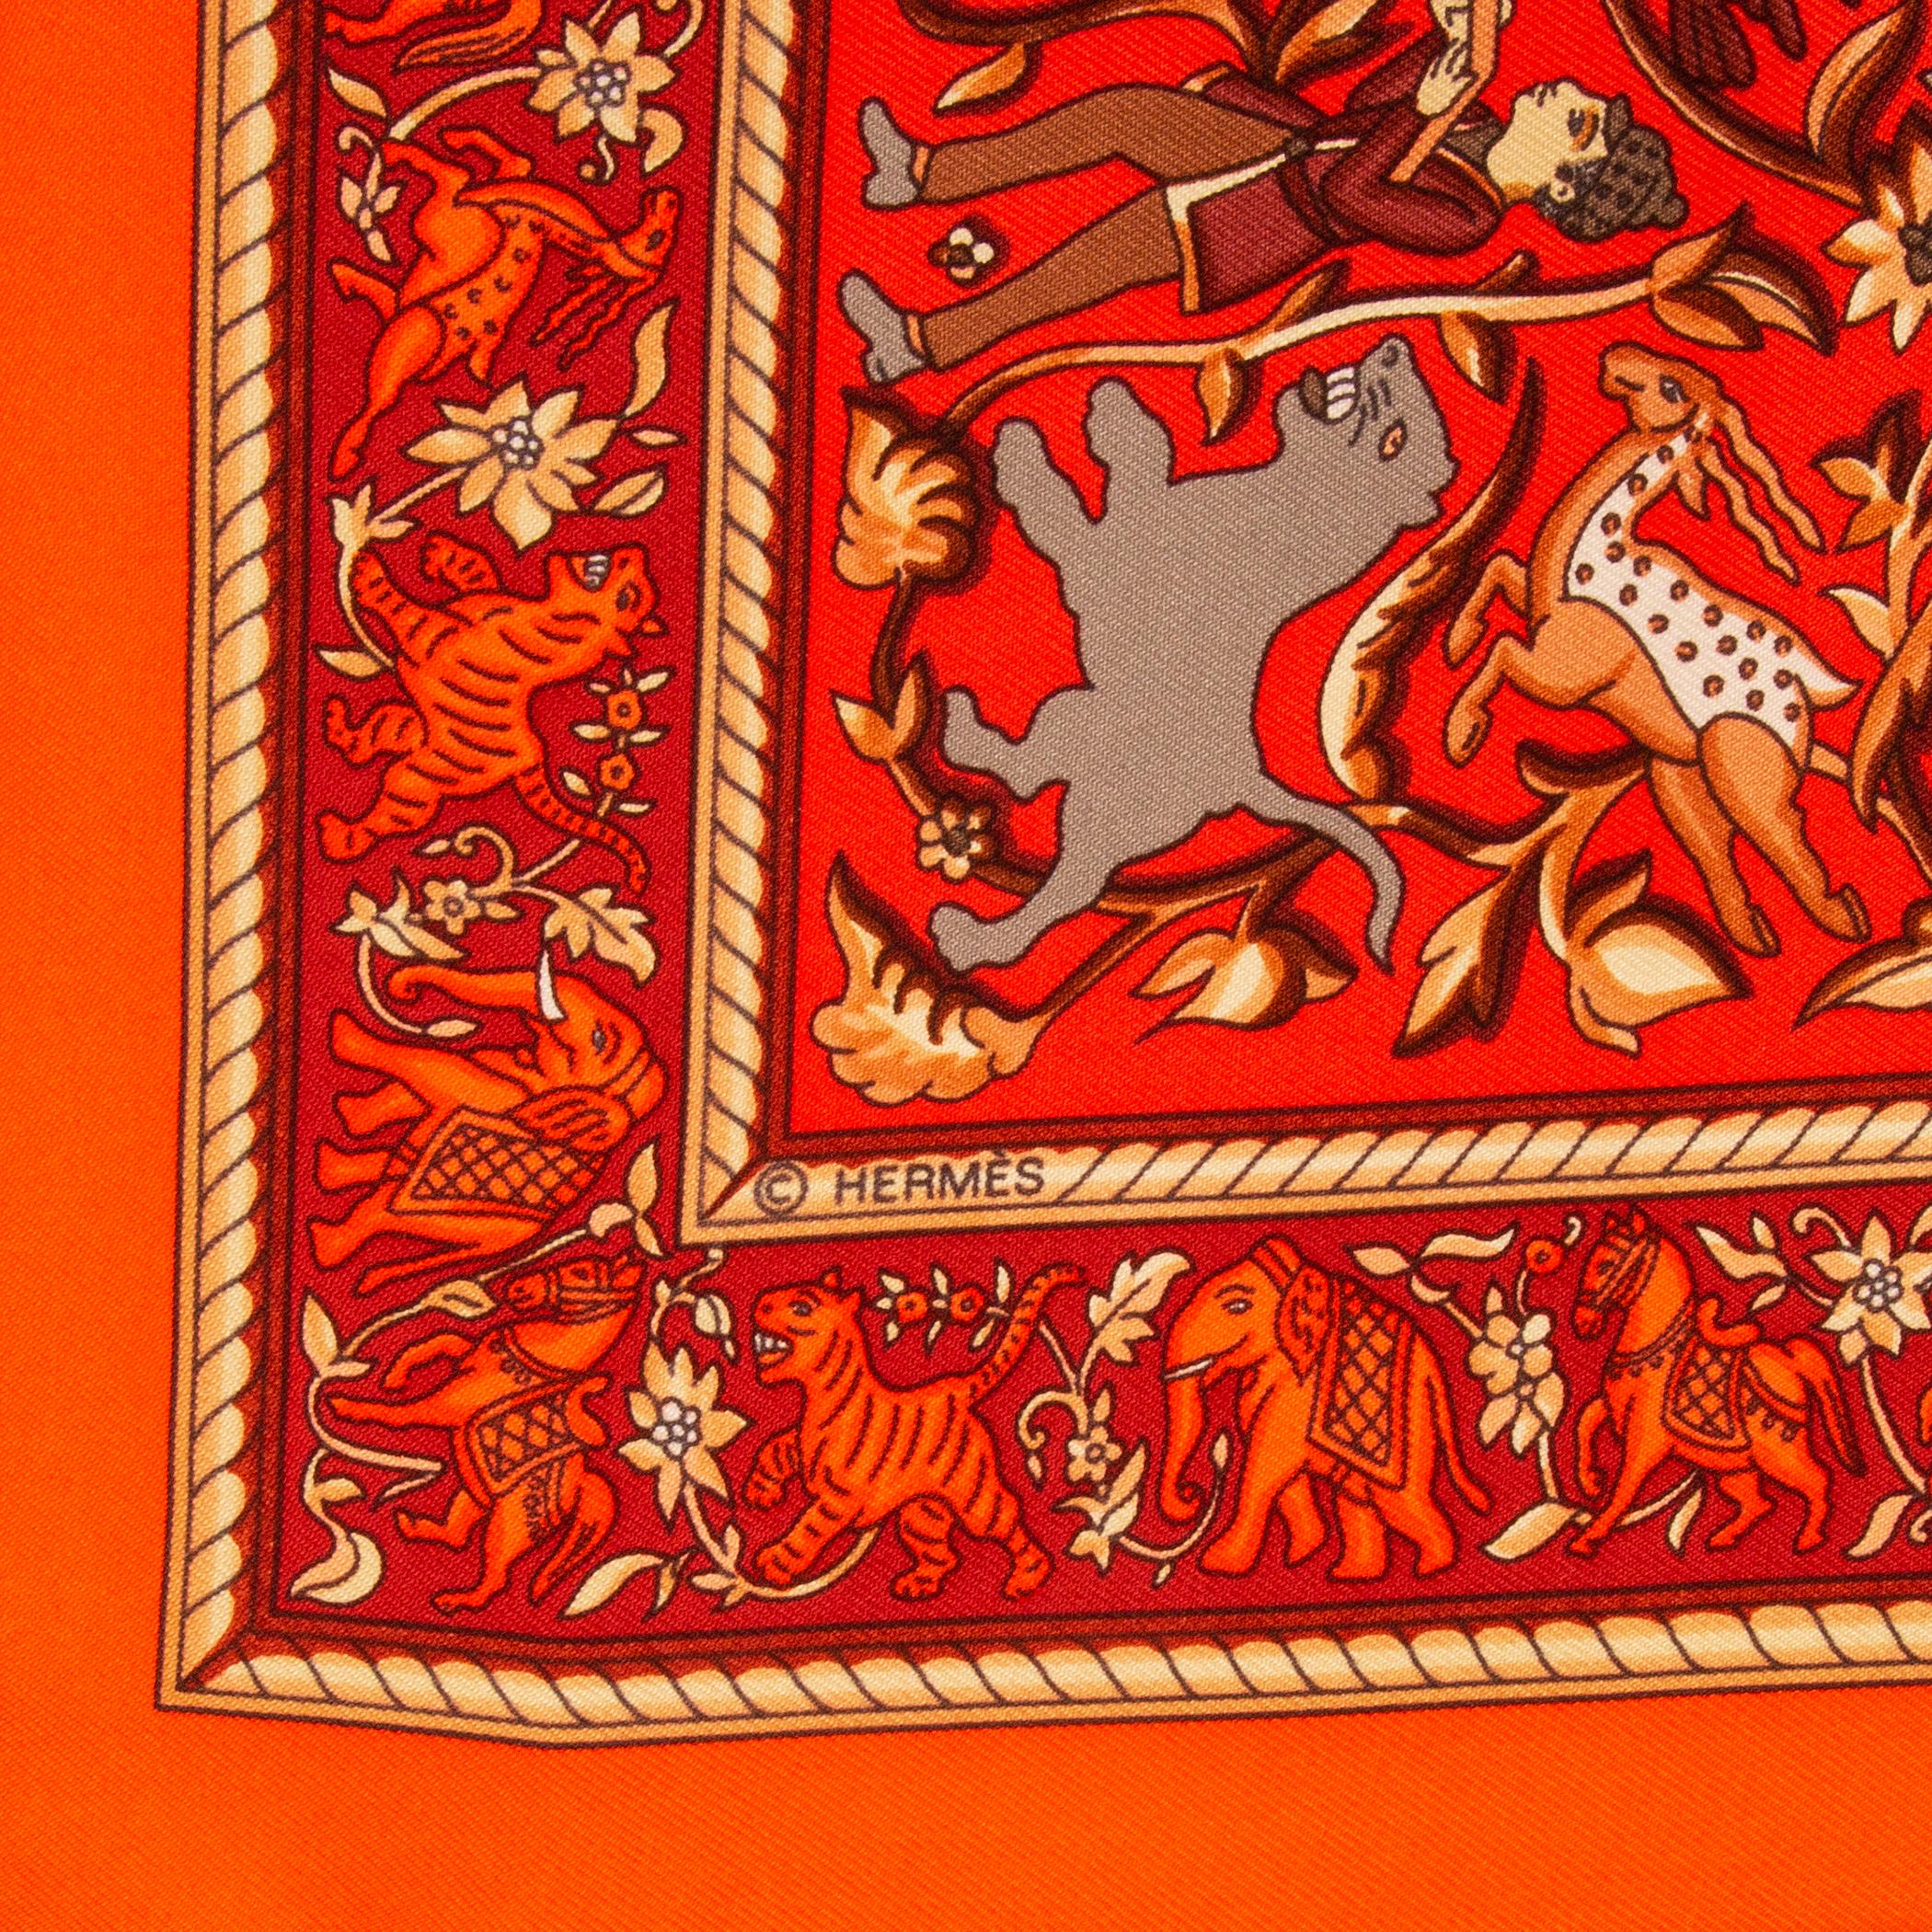 Hermes 'Chasse en Inde' by Michel Duchene scarf in bright orange, crimson, scarlet, beige, and white silk twill. Has been worn and is in excellent condition. 

Width 90cm (35.1in)
Height 90cm (35.1in)